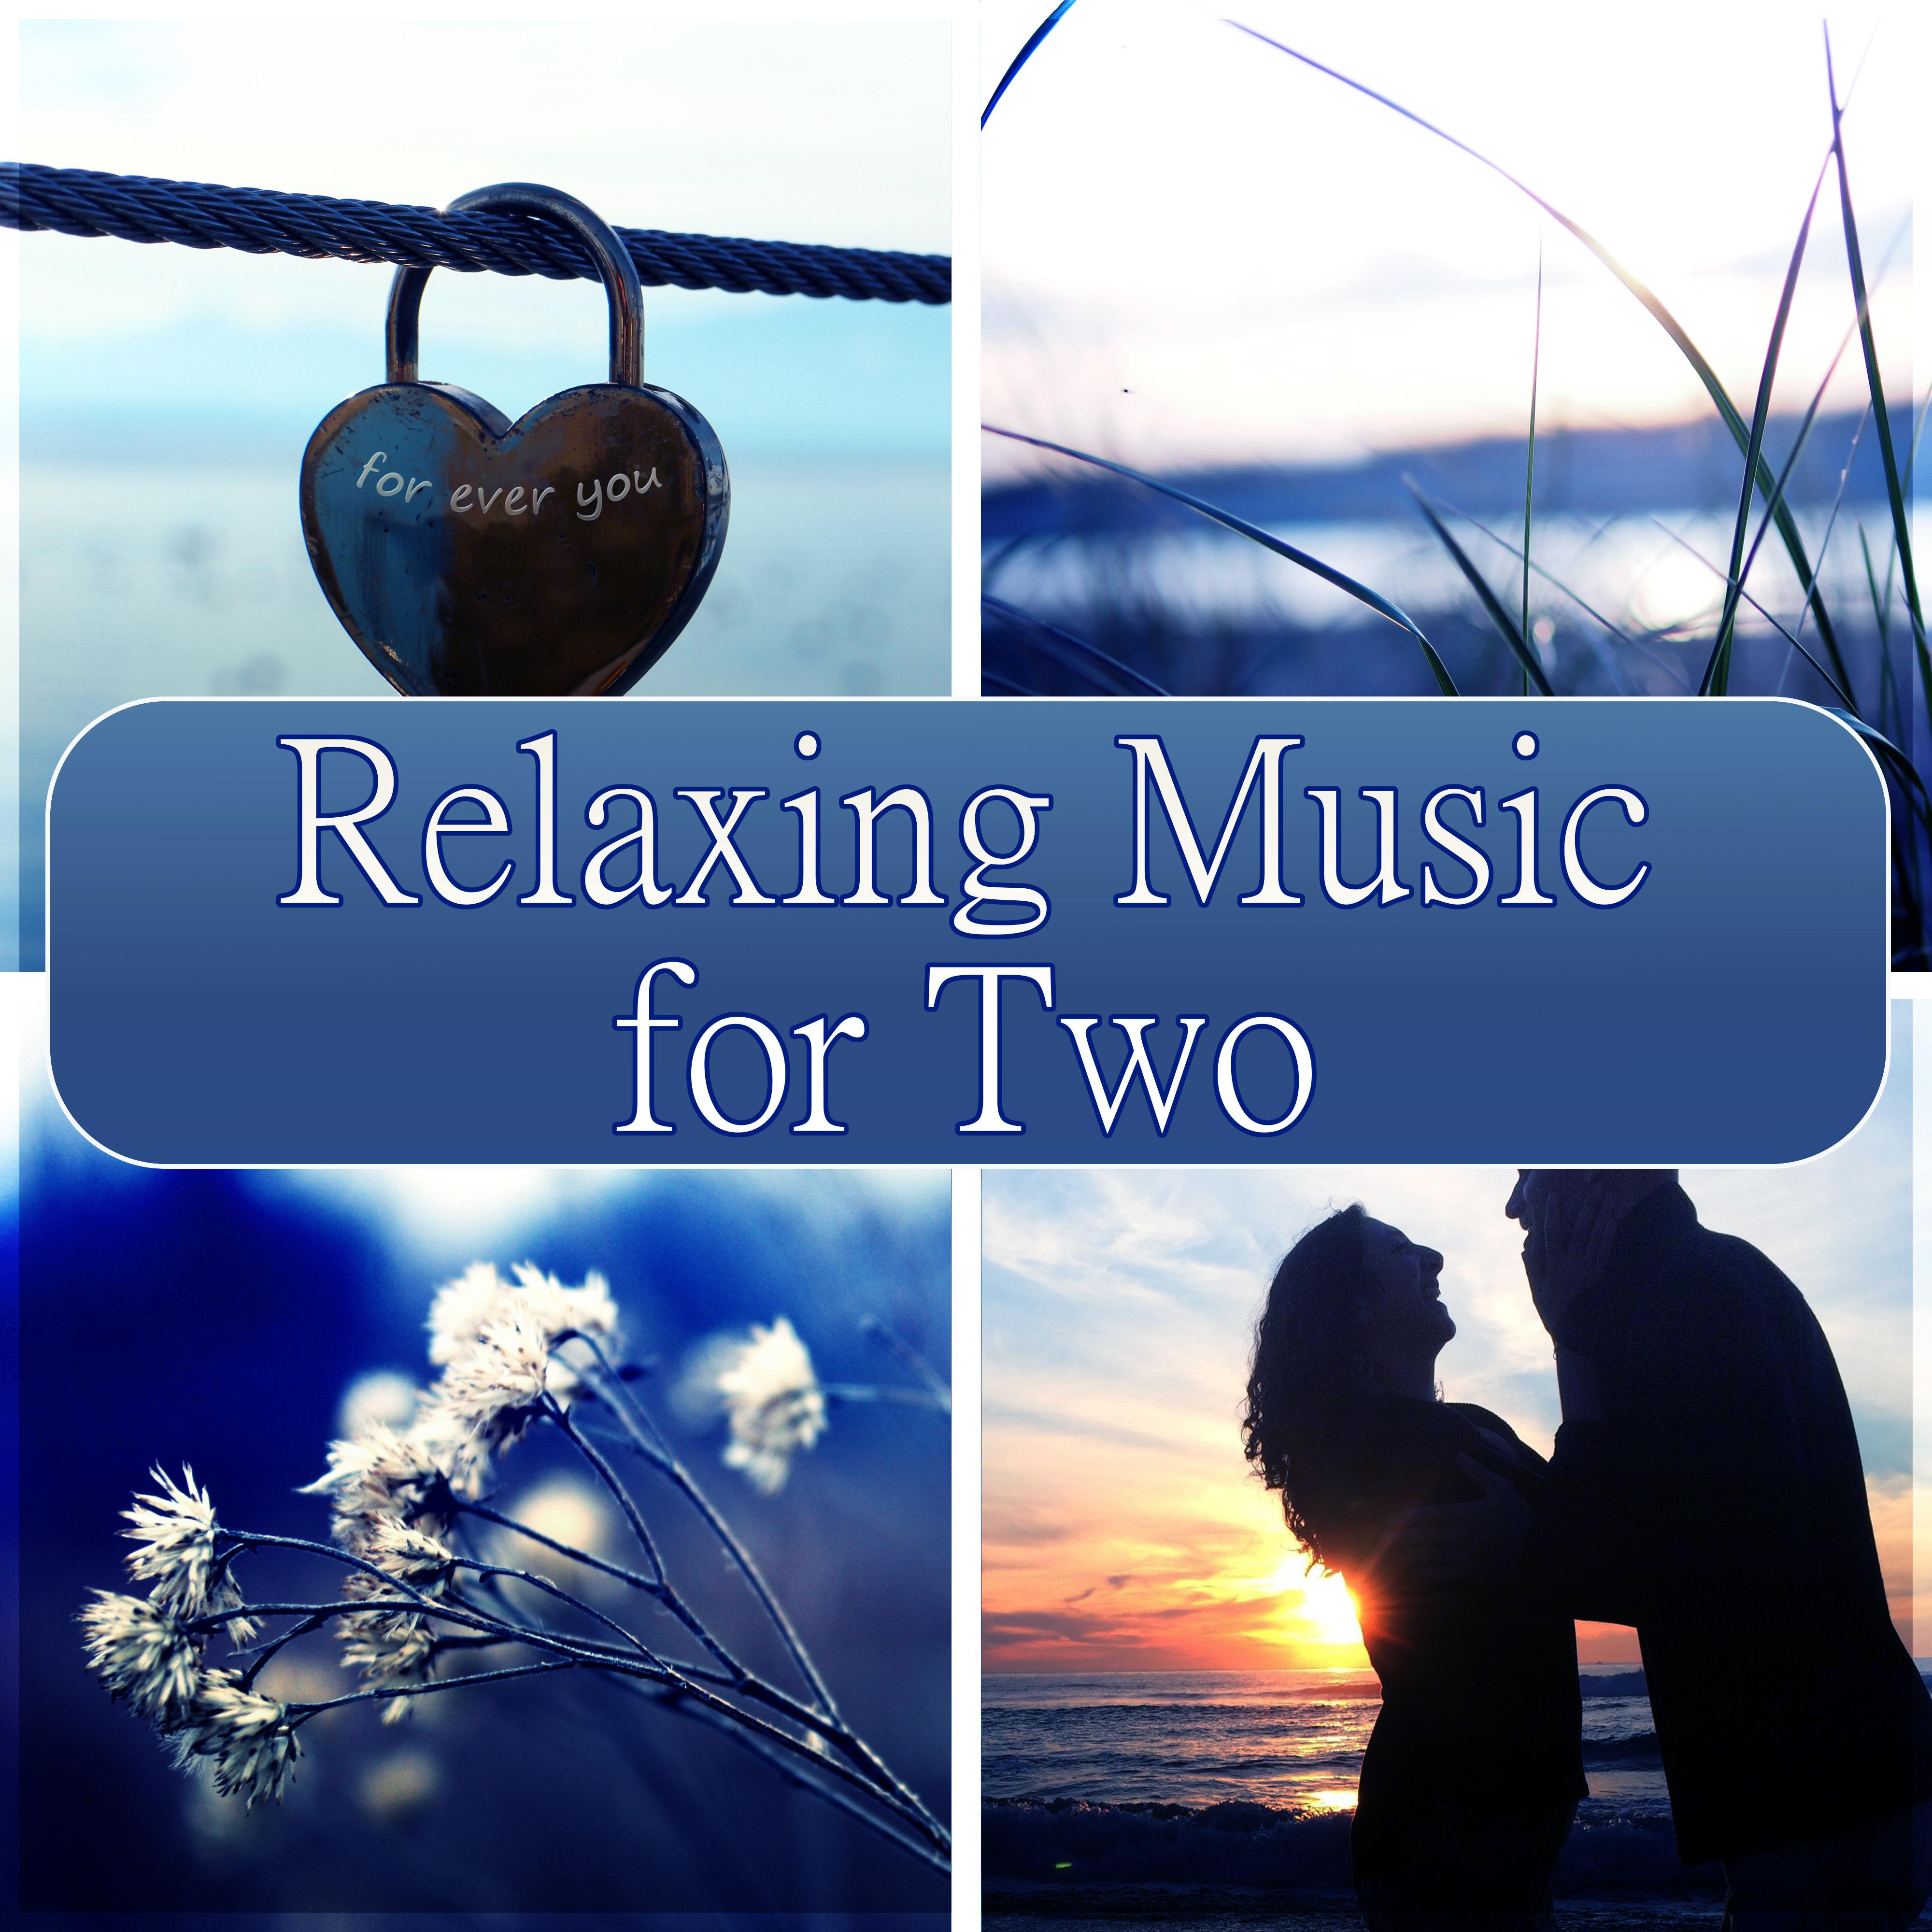 Relaxing Music for Two – Romantic Piano Music, Love Songs, Candle Light Dinner, Relaxation Music, Date Night, Proposal, Anniversary